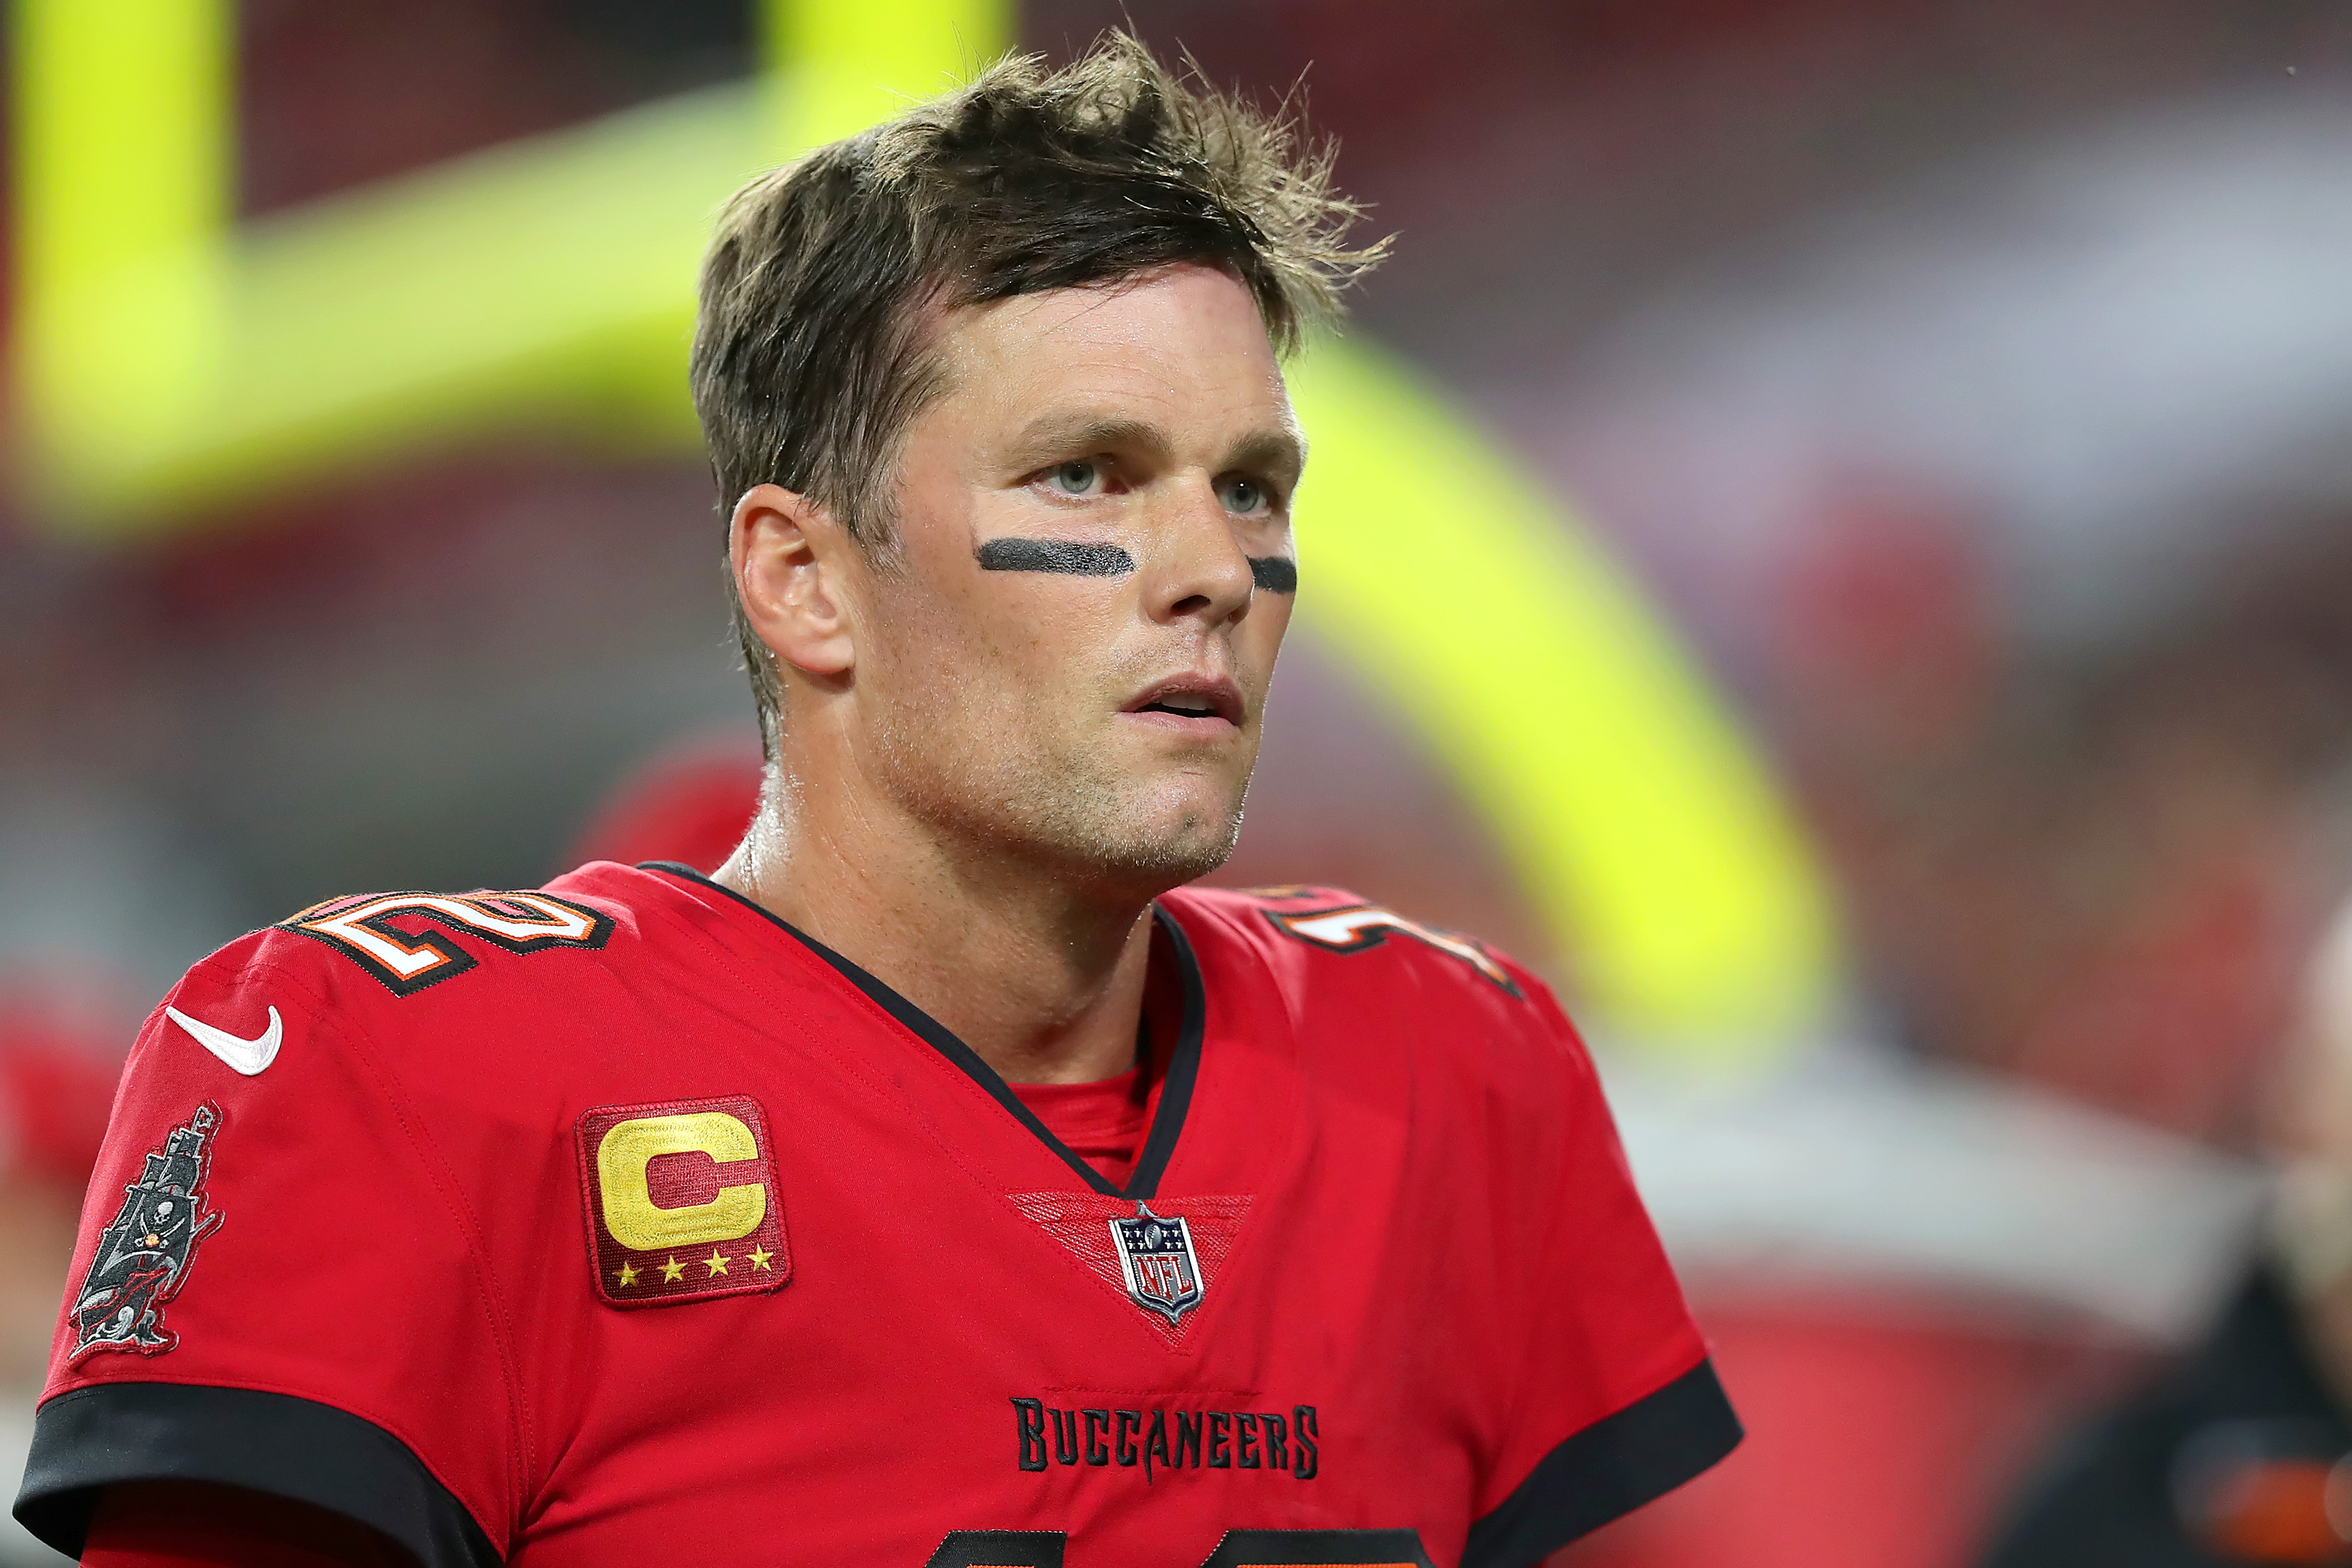 Tom Brady tablet toss: NFL issues warning to Buccaneers QB